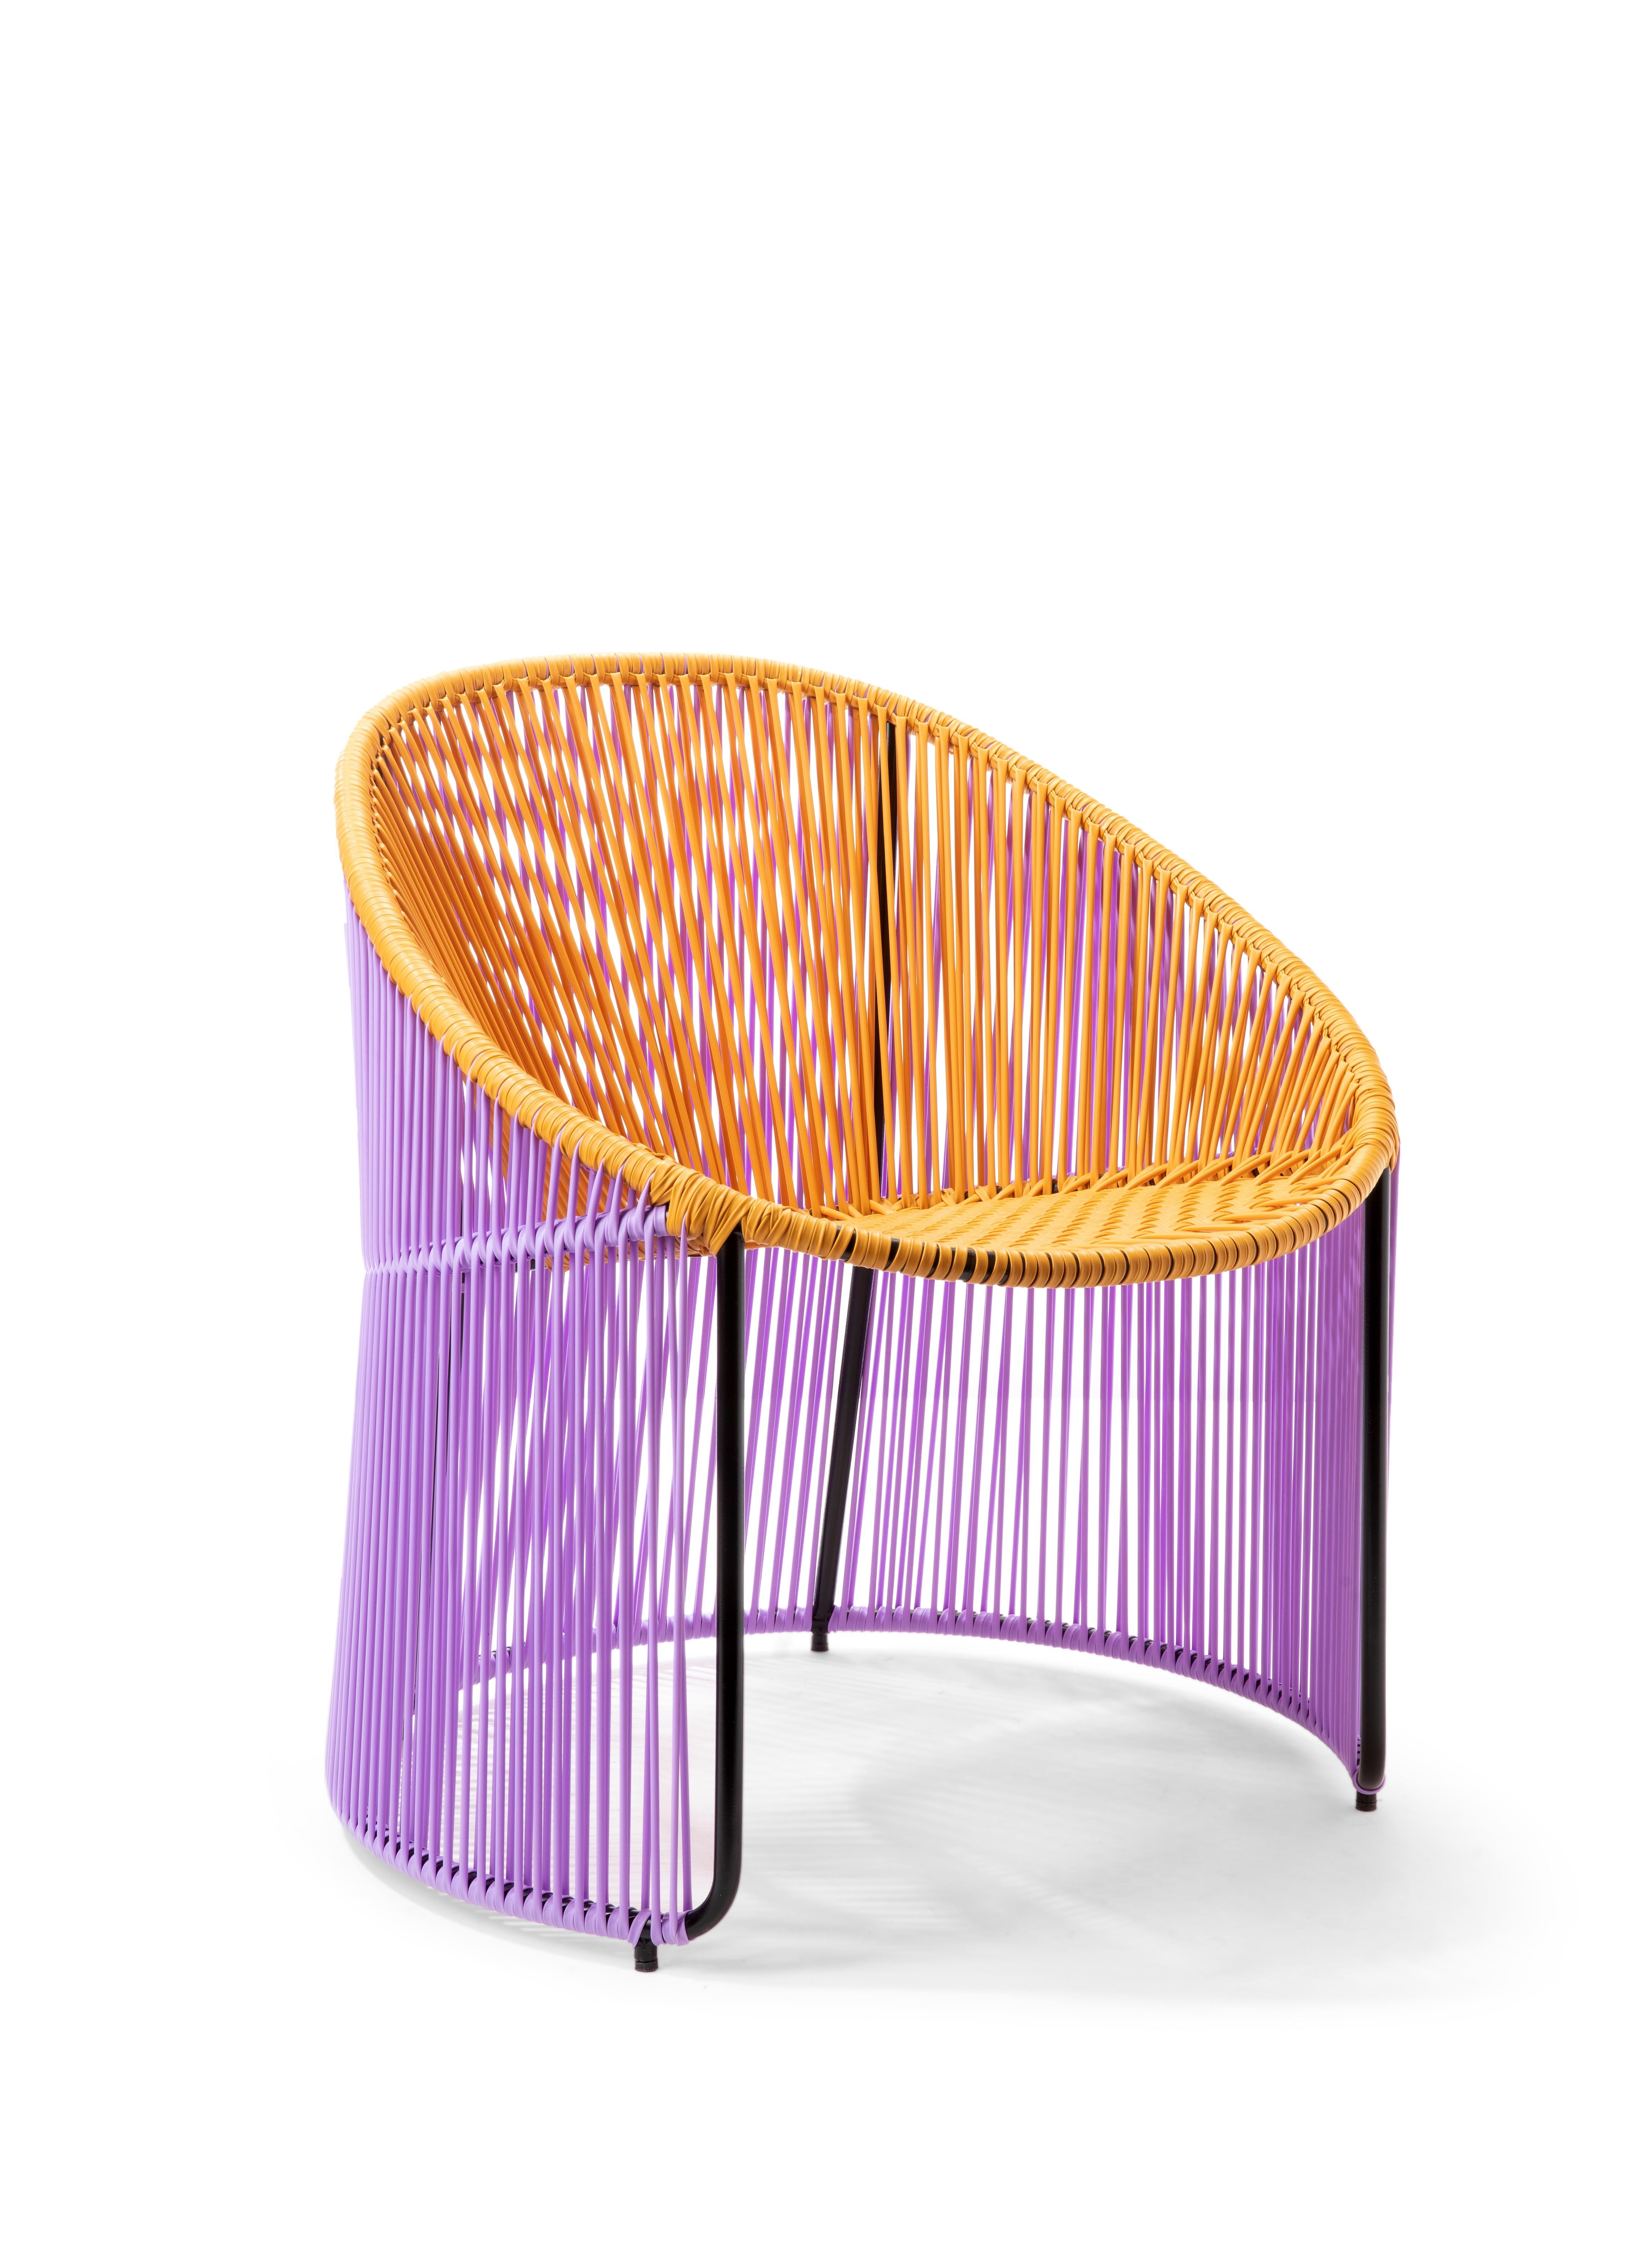 Honey Cartagenas lounge chair by Sebastian Herkner
Materials: PVC strings. Galvanized and powder-coated tubular steel frame
Technique: made from recycled plastic. Weaved by local craftspeople in Colombia. 
Dimensions: W 64 x D 70 x H 74 cm